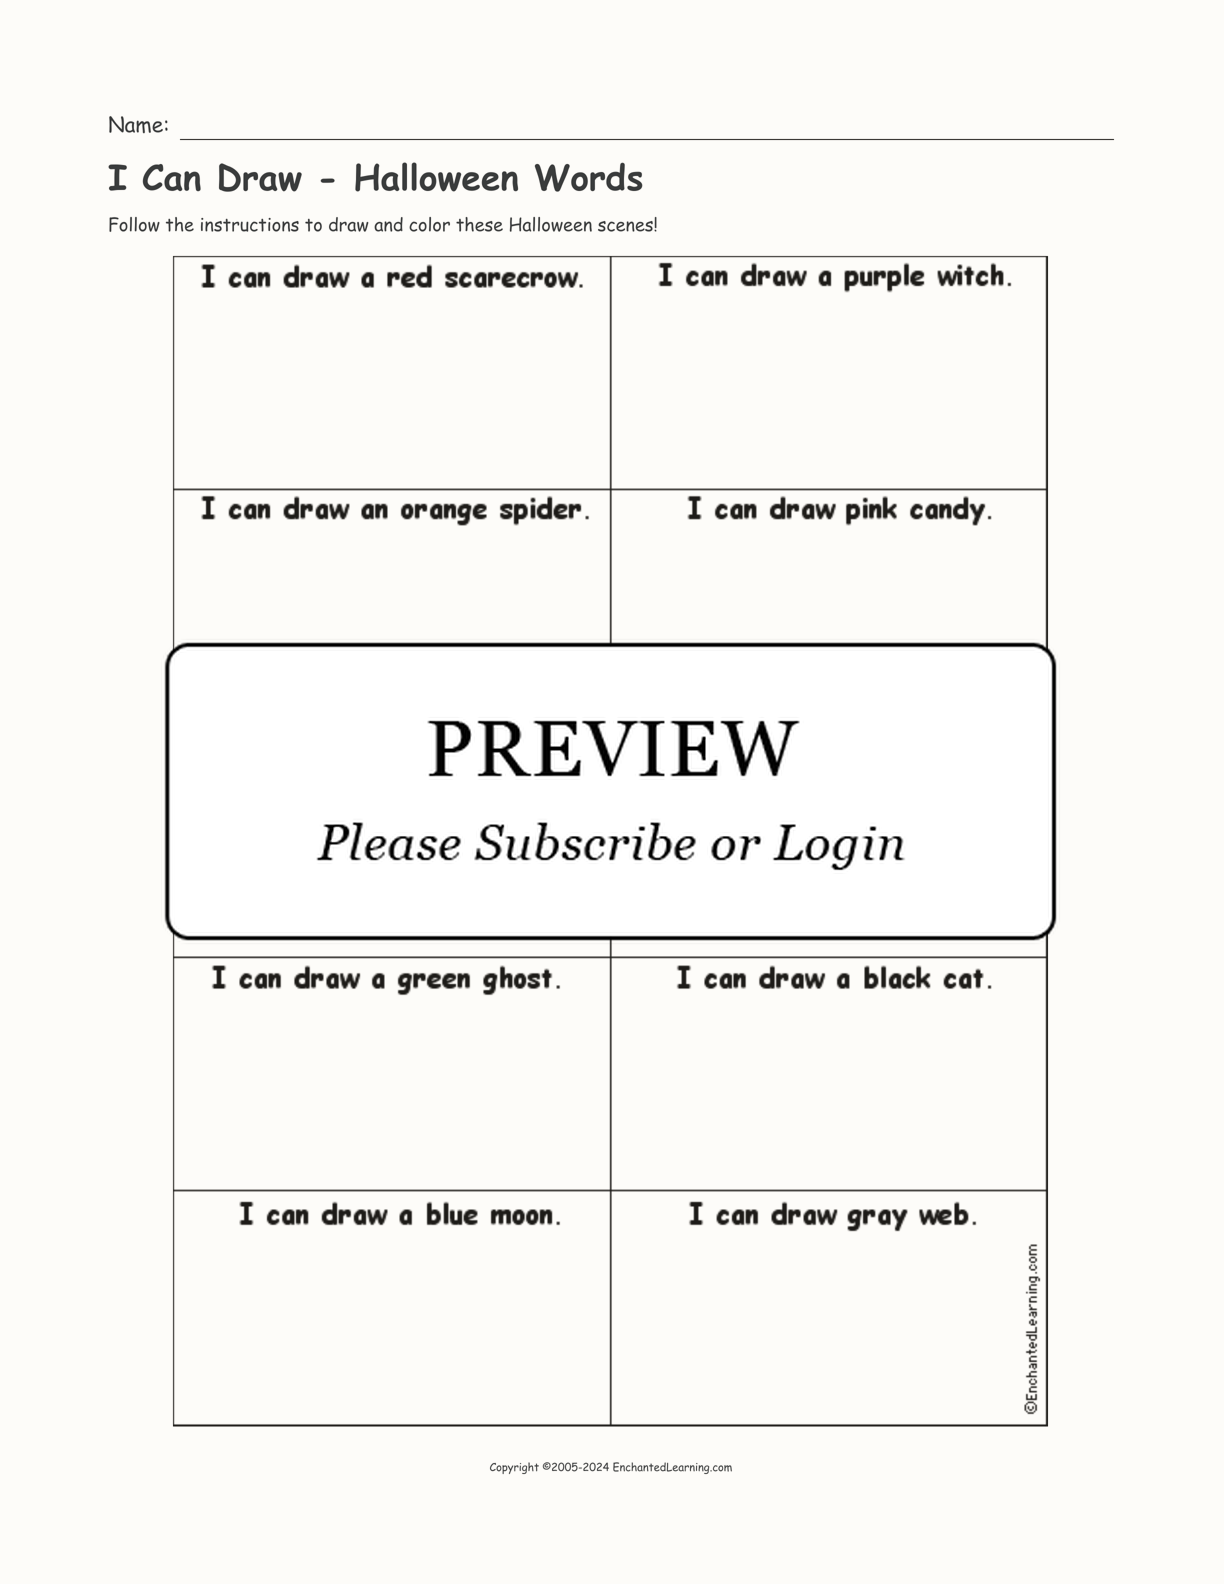 I Can Draw - Halloween Words interactive printout page 1